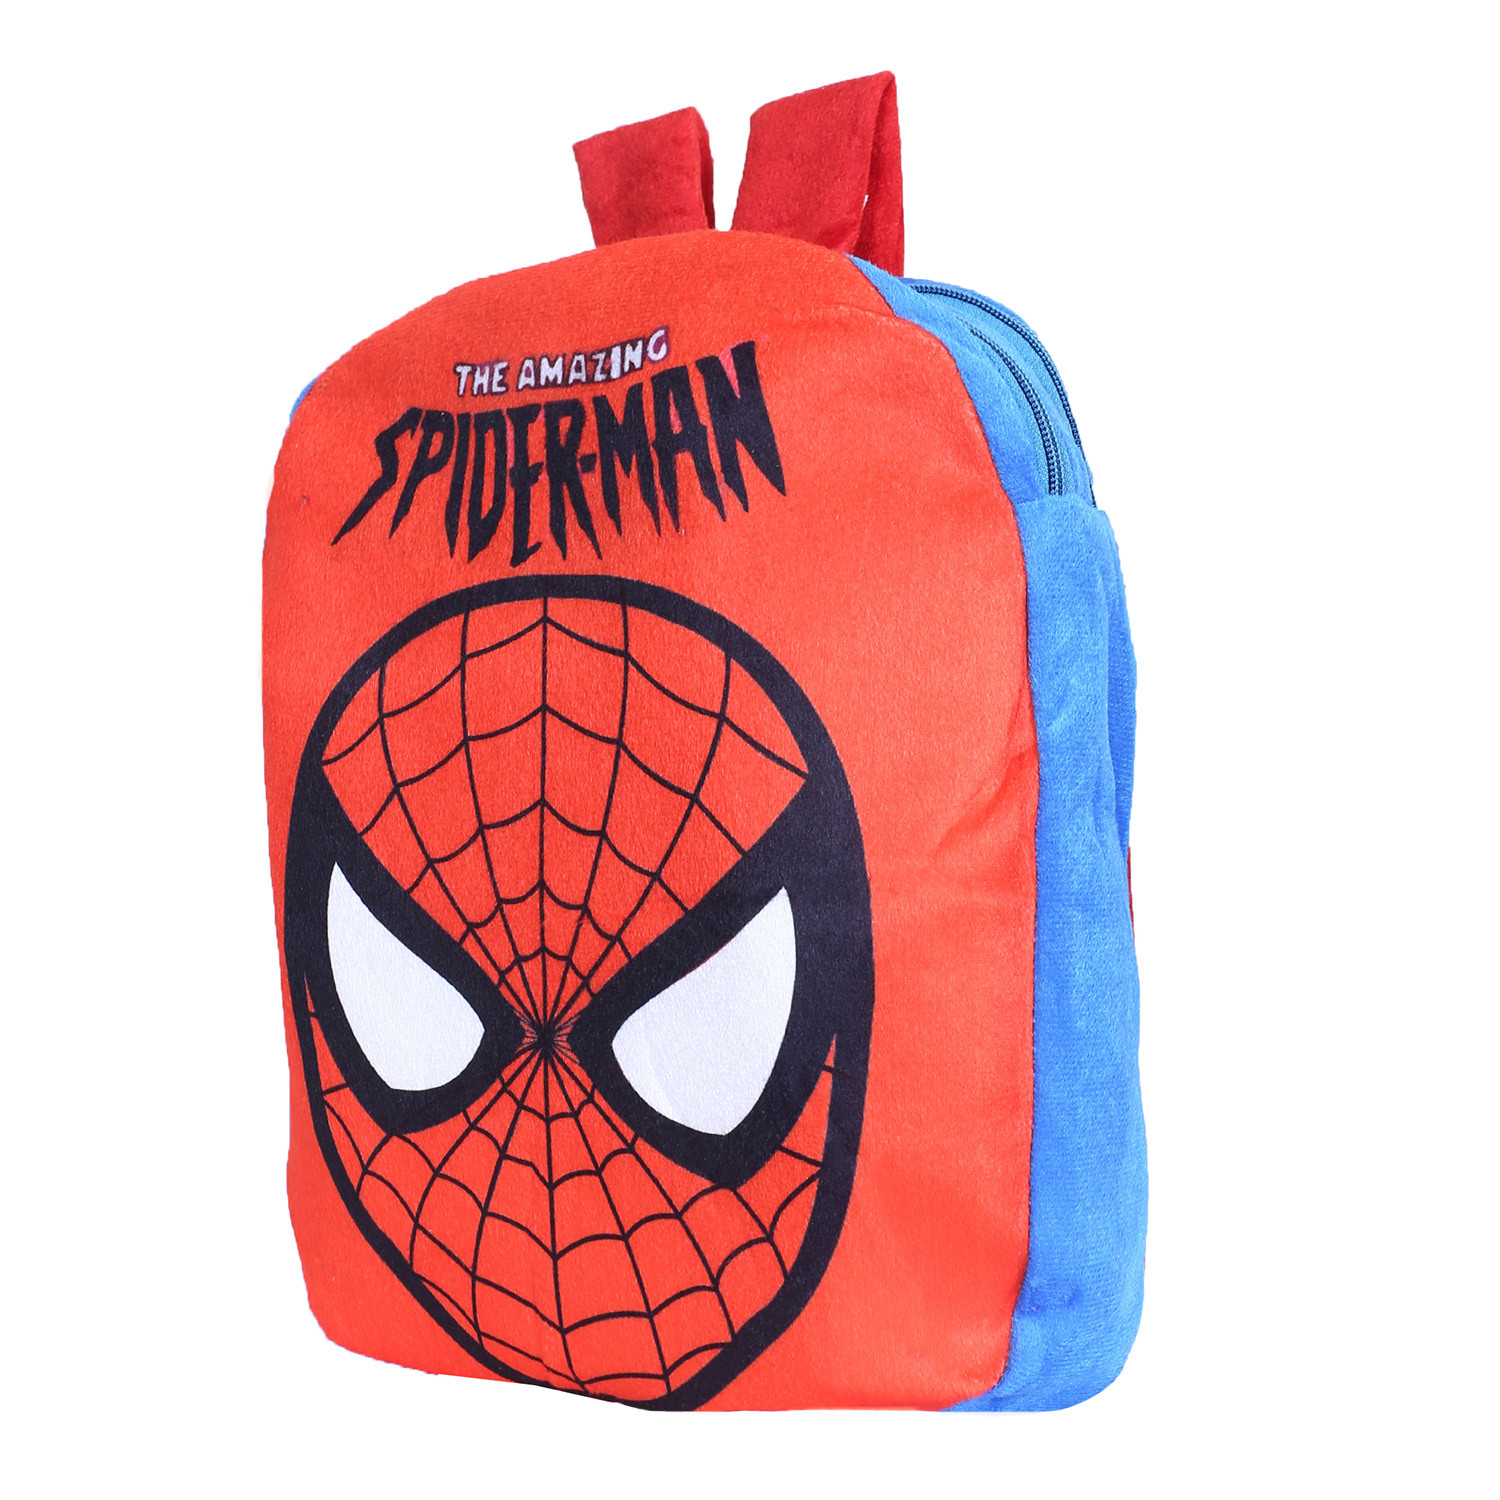 Kuber Industries Marvel The Amazing Spiderman Plush Backpack|2 Compartment Velvet School Bag|Durable Toddler Haversack For Travel,School with Zipper Closure (Red)